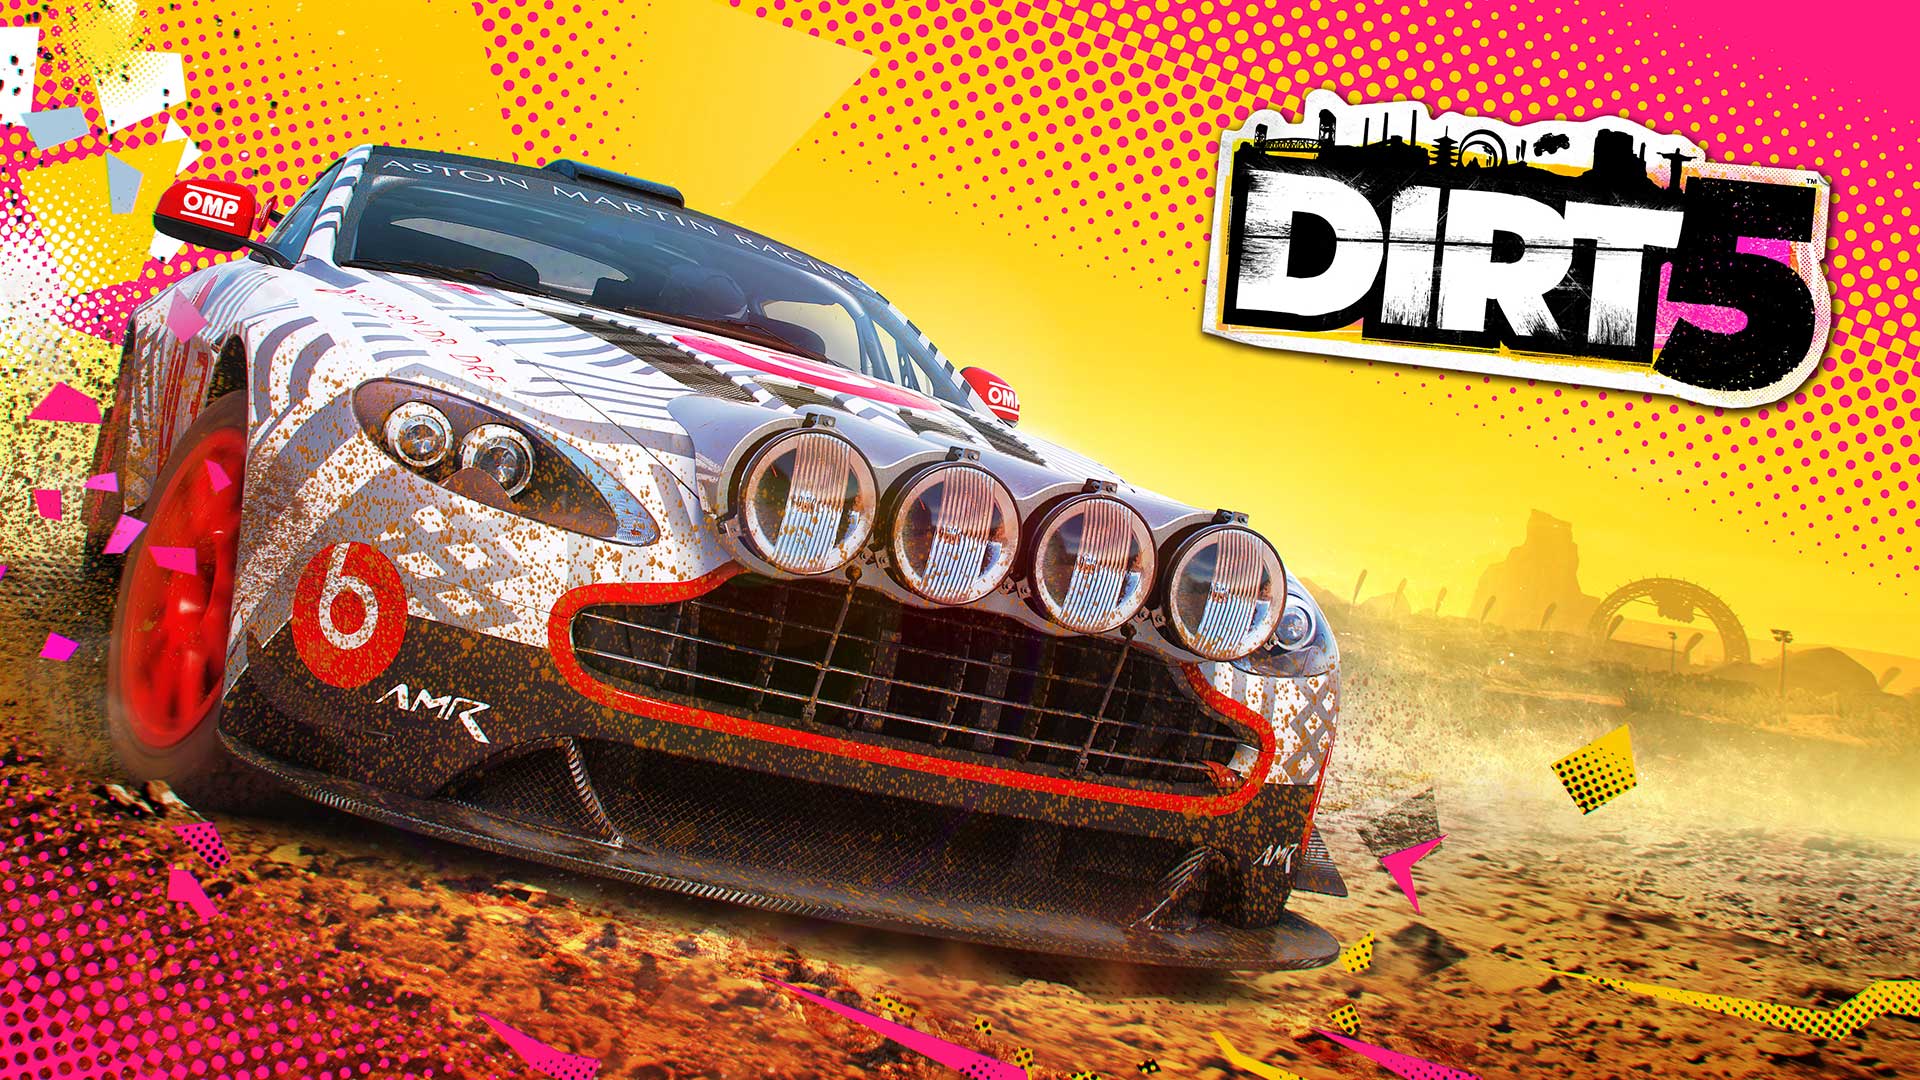 DIRT 5 GETS WILD WITH THE LATEST CONTENT UPDATE